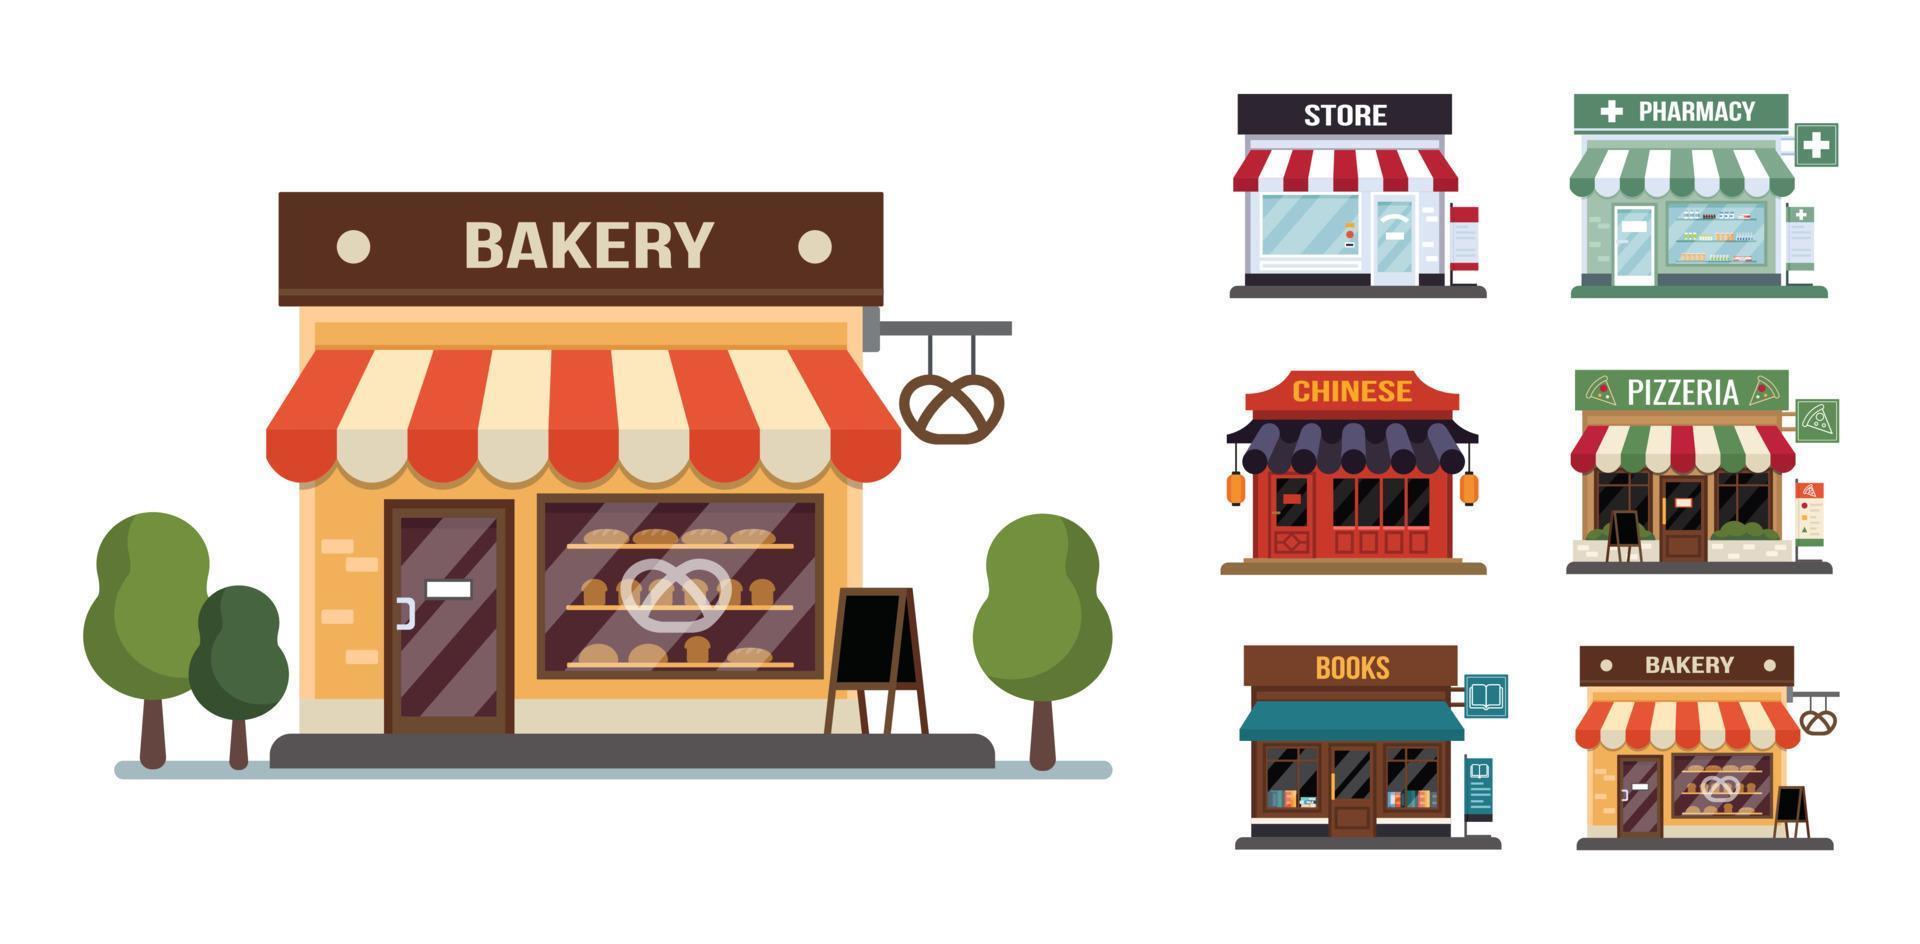 Flat style shop little tiny icon set. Chinese, bakery, pizza, pharmacy, books, store . vector